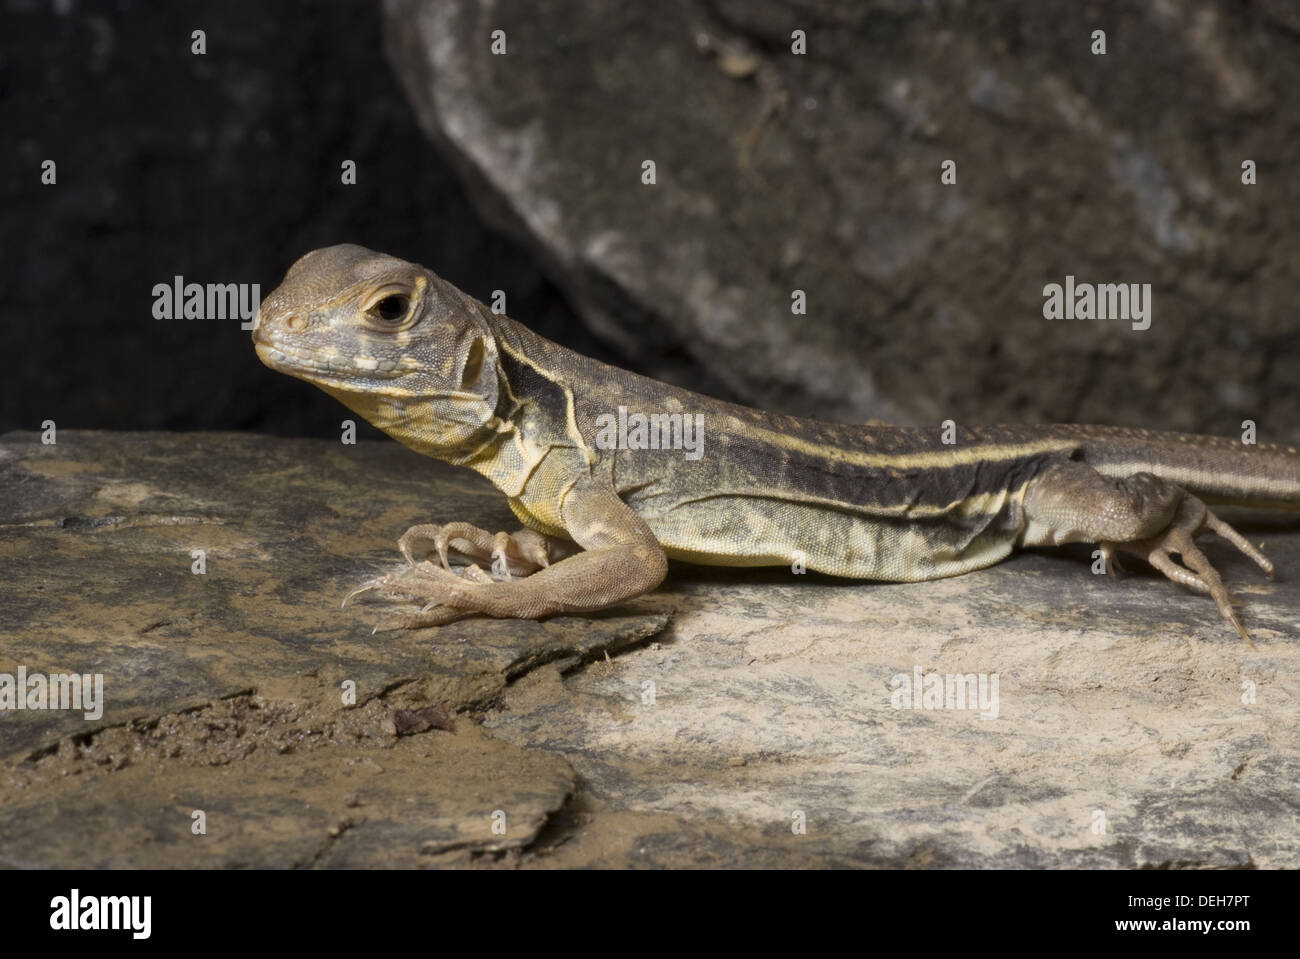 common butterfly lizard, leiolepis belliana Stock Photo